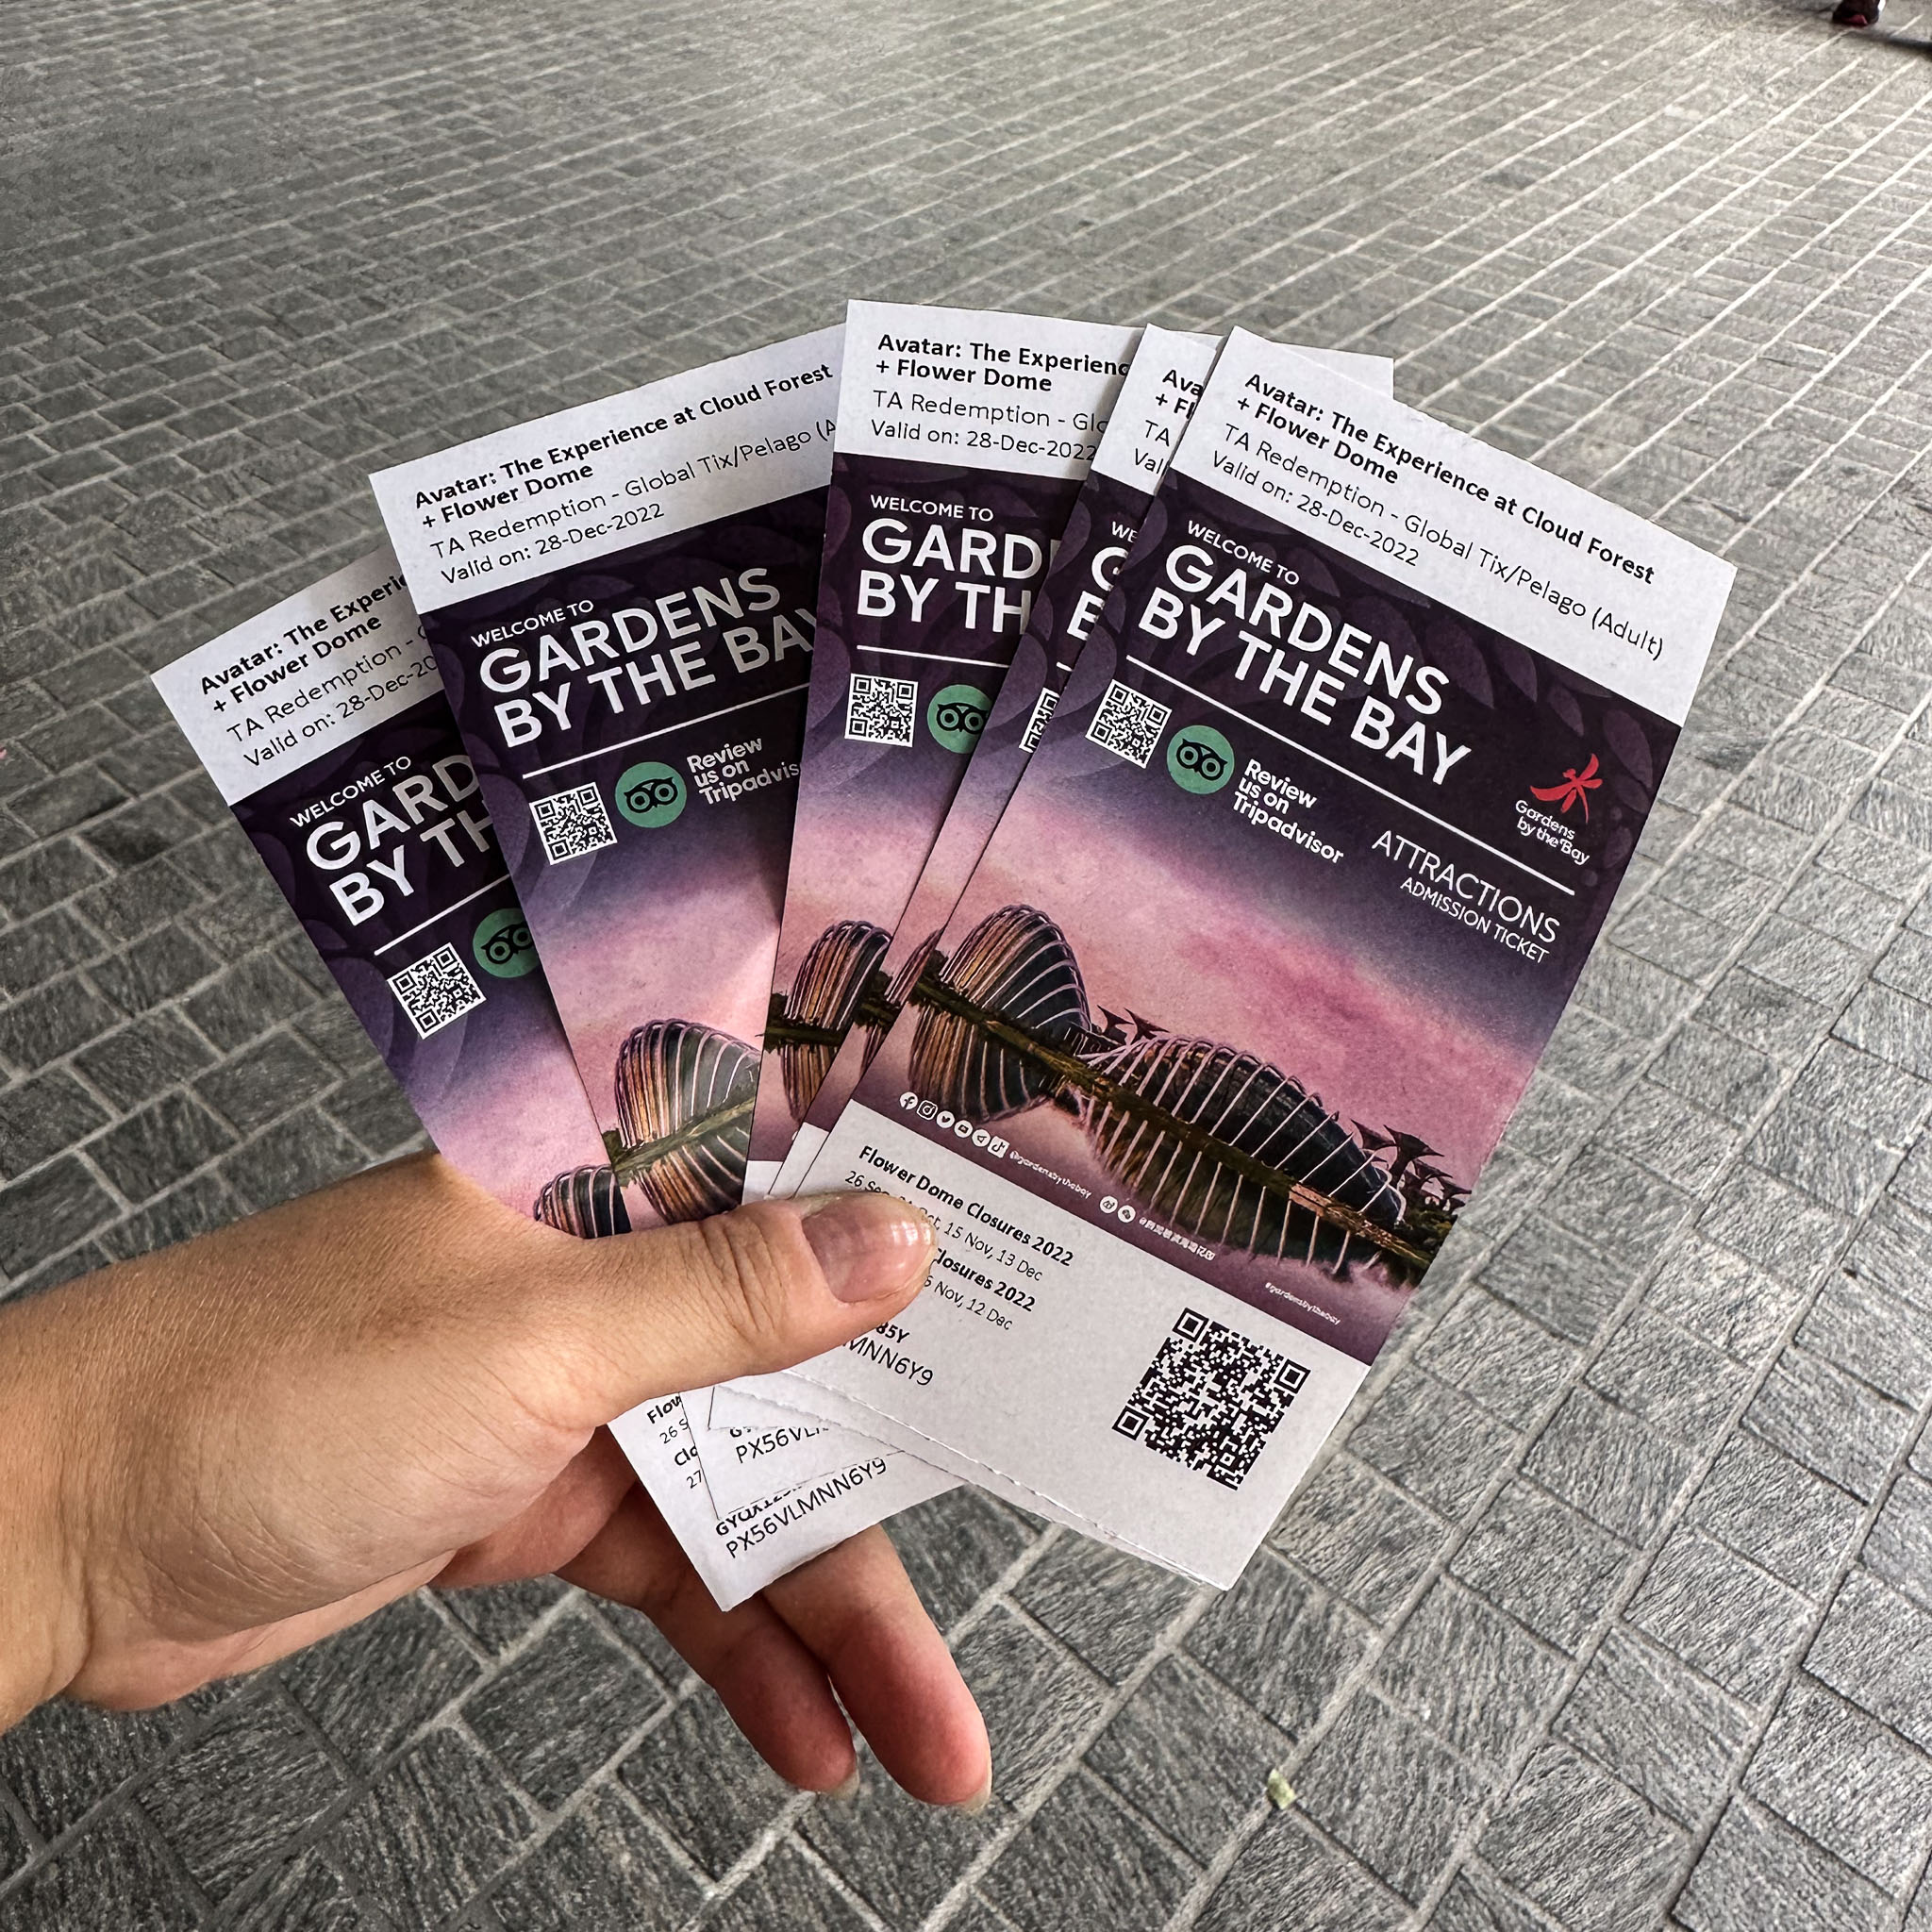 Tickets for Gardens By the Bay